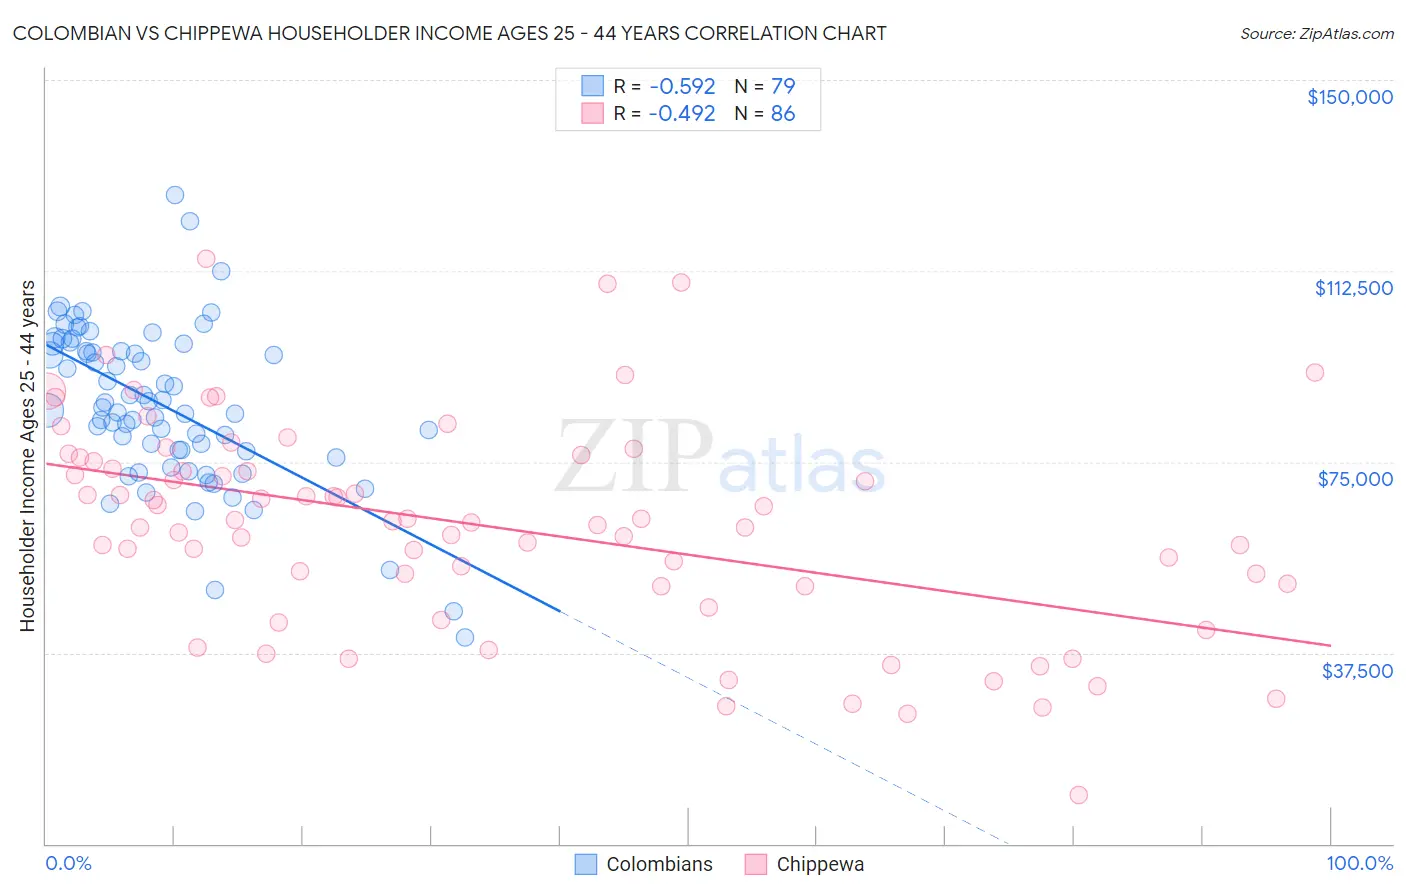 Colombian vs Chippewa Householder Income Ages 25 - 44 years